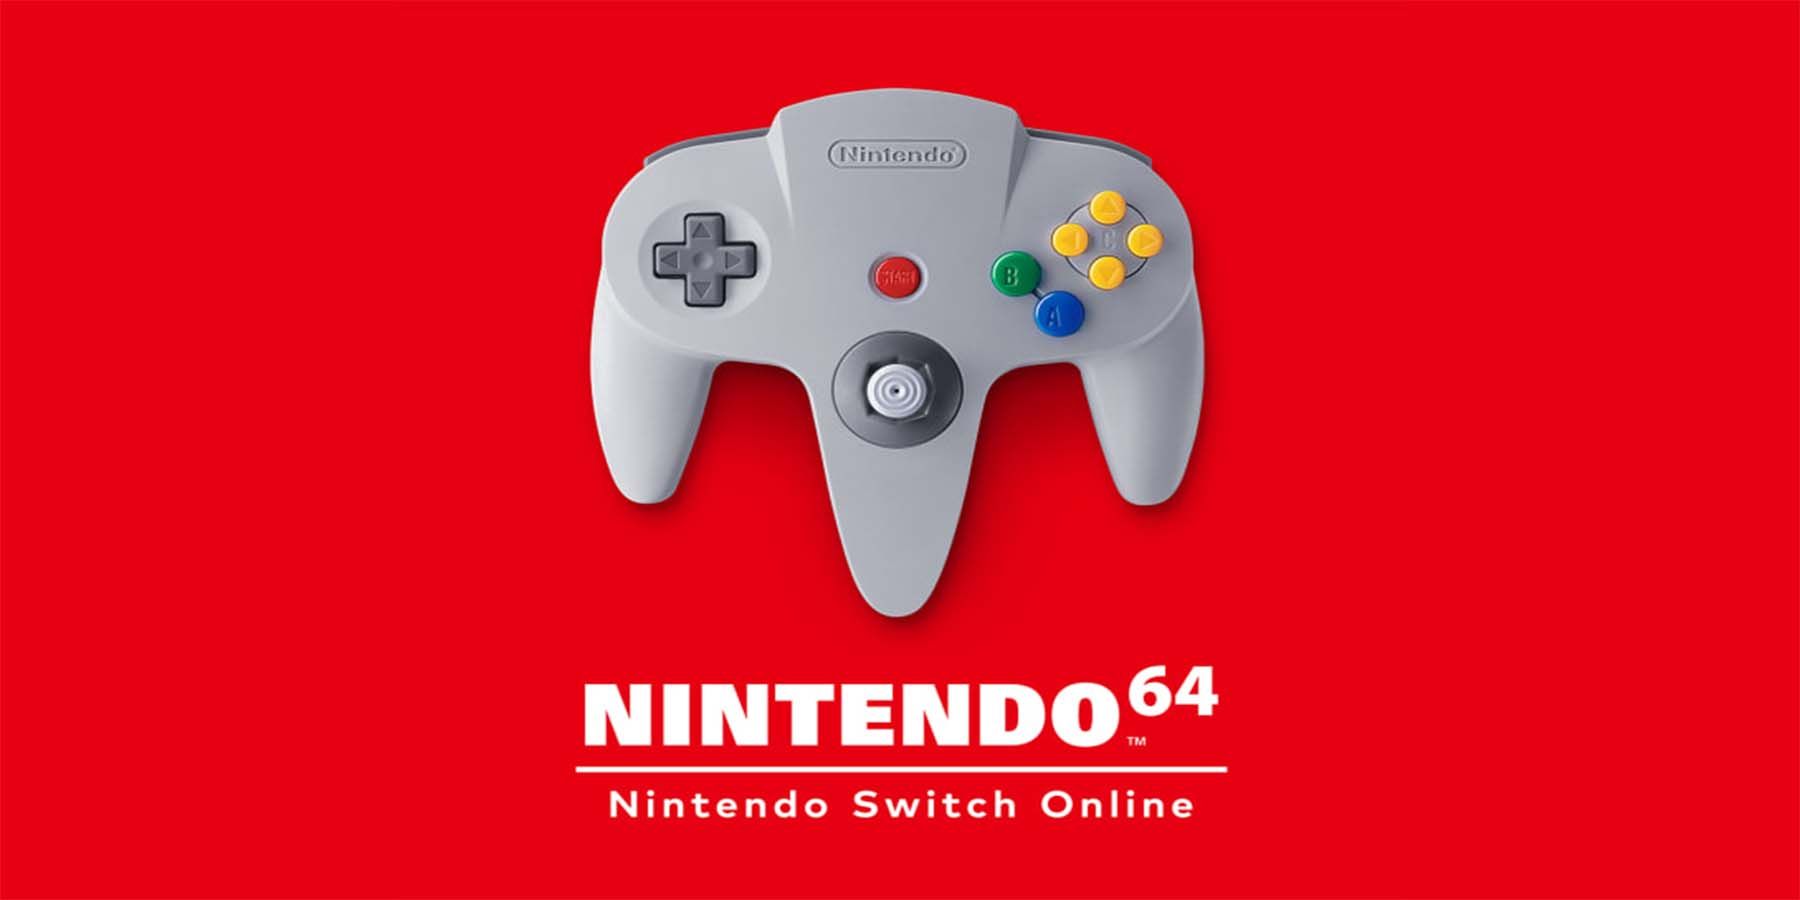 nintendo 64 expansion pack control issues